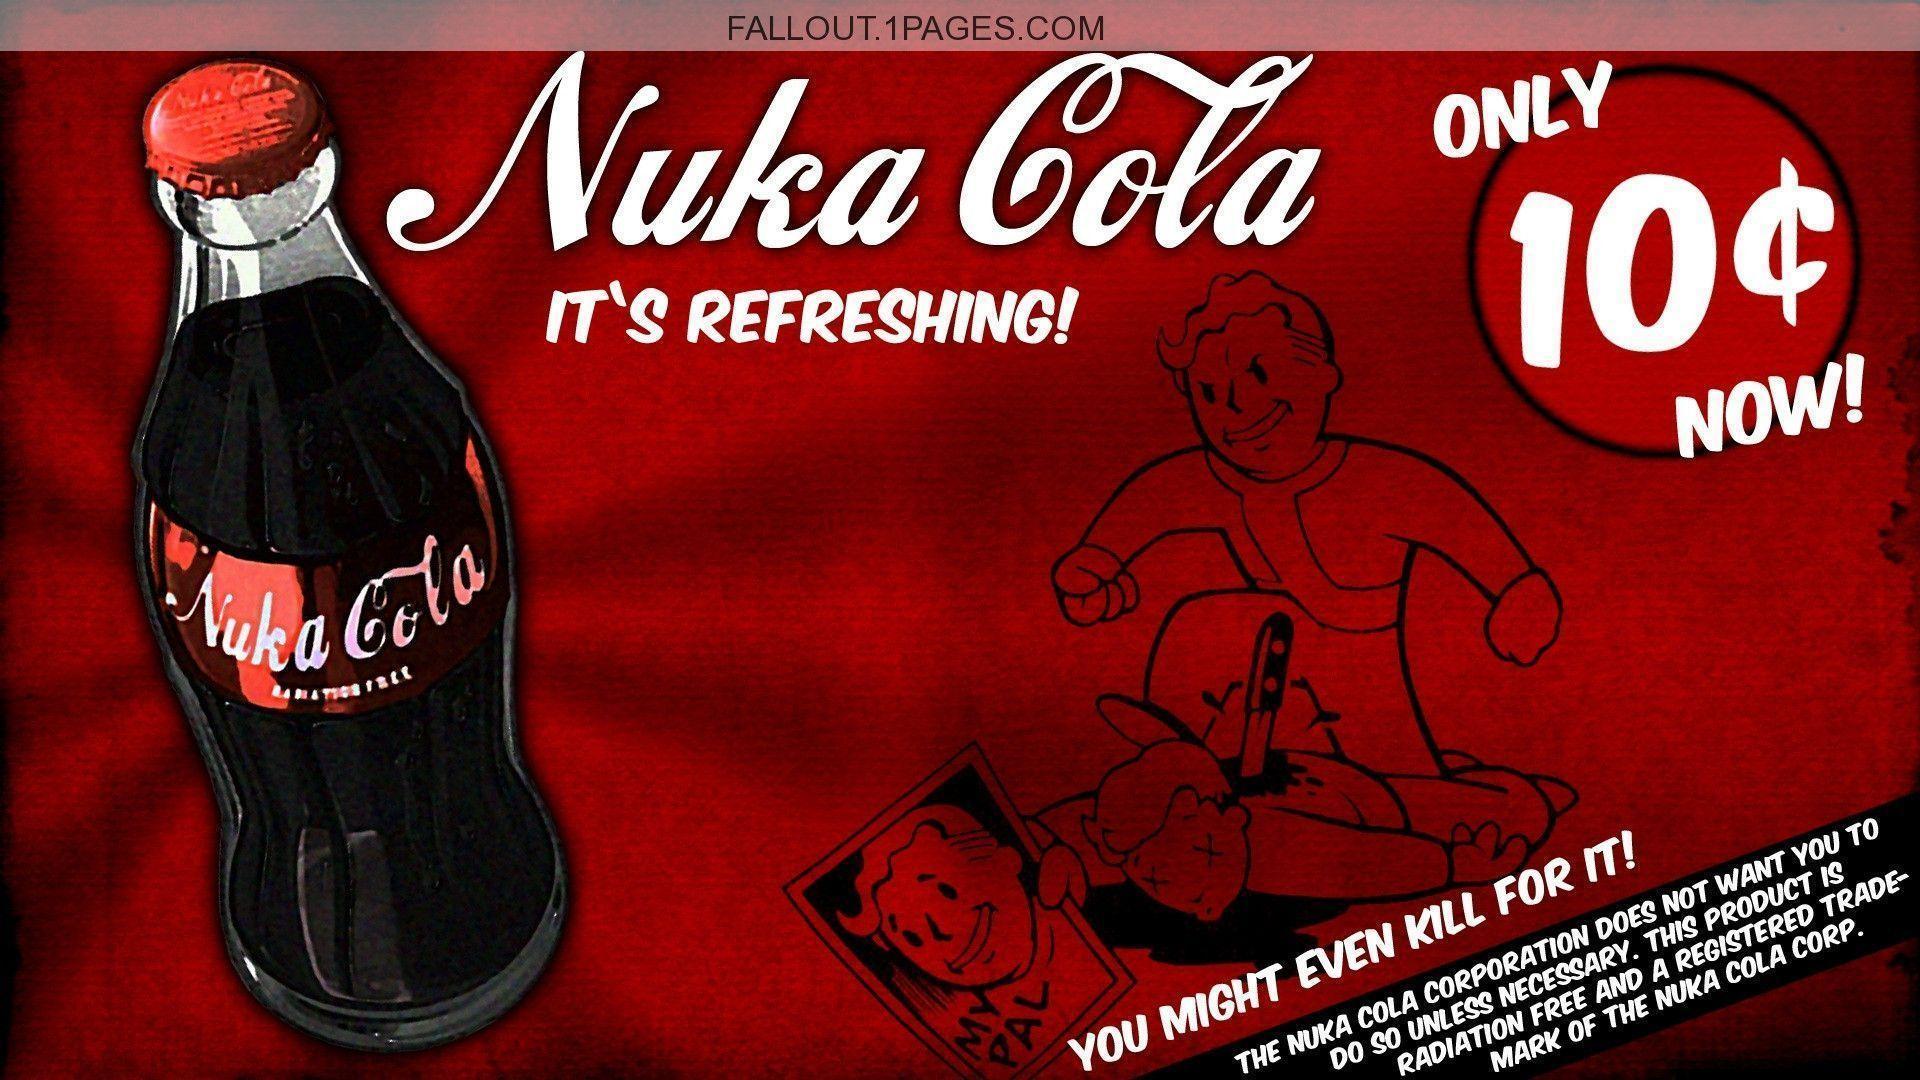 nuka cola wallpaper hd - Fallout.1 Pages.Com Nuka Cola Only It'S Refreshing! 10 Now! Vick a Cola You Might Even Kill For It! The Nuka Cola Corporation Does Not Want You To Do So Unless Necessary. This Product Is Radiation Free And A Registered Trade Mark 